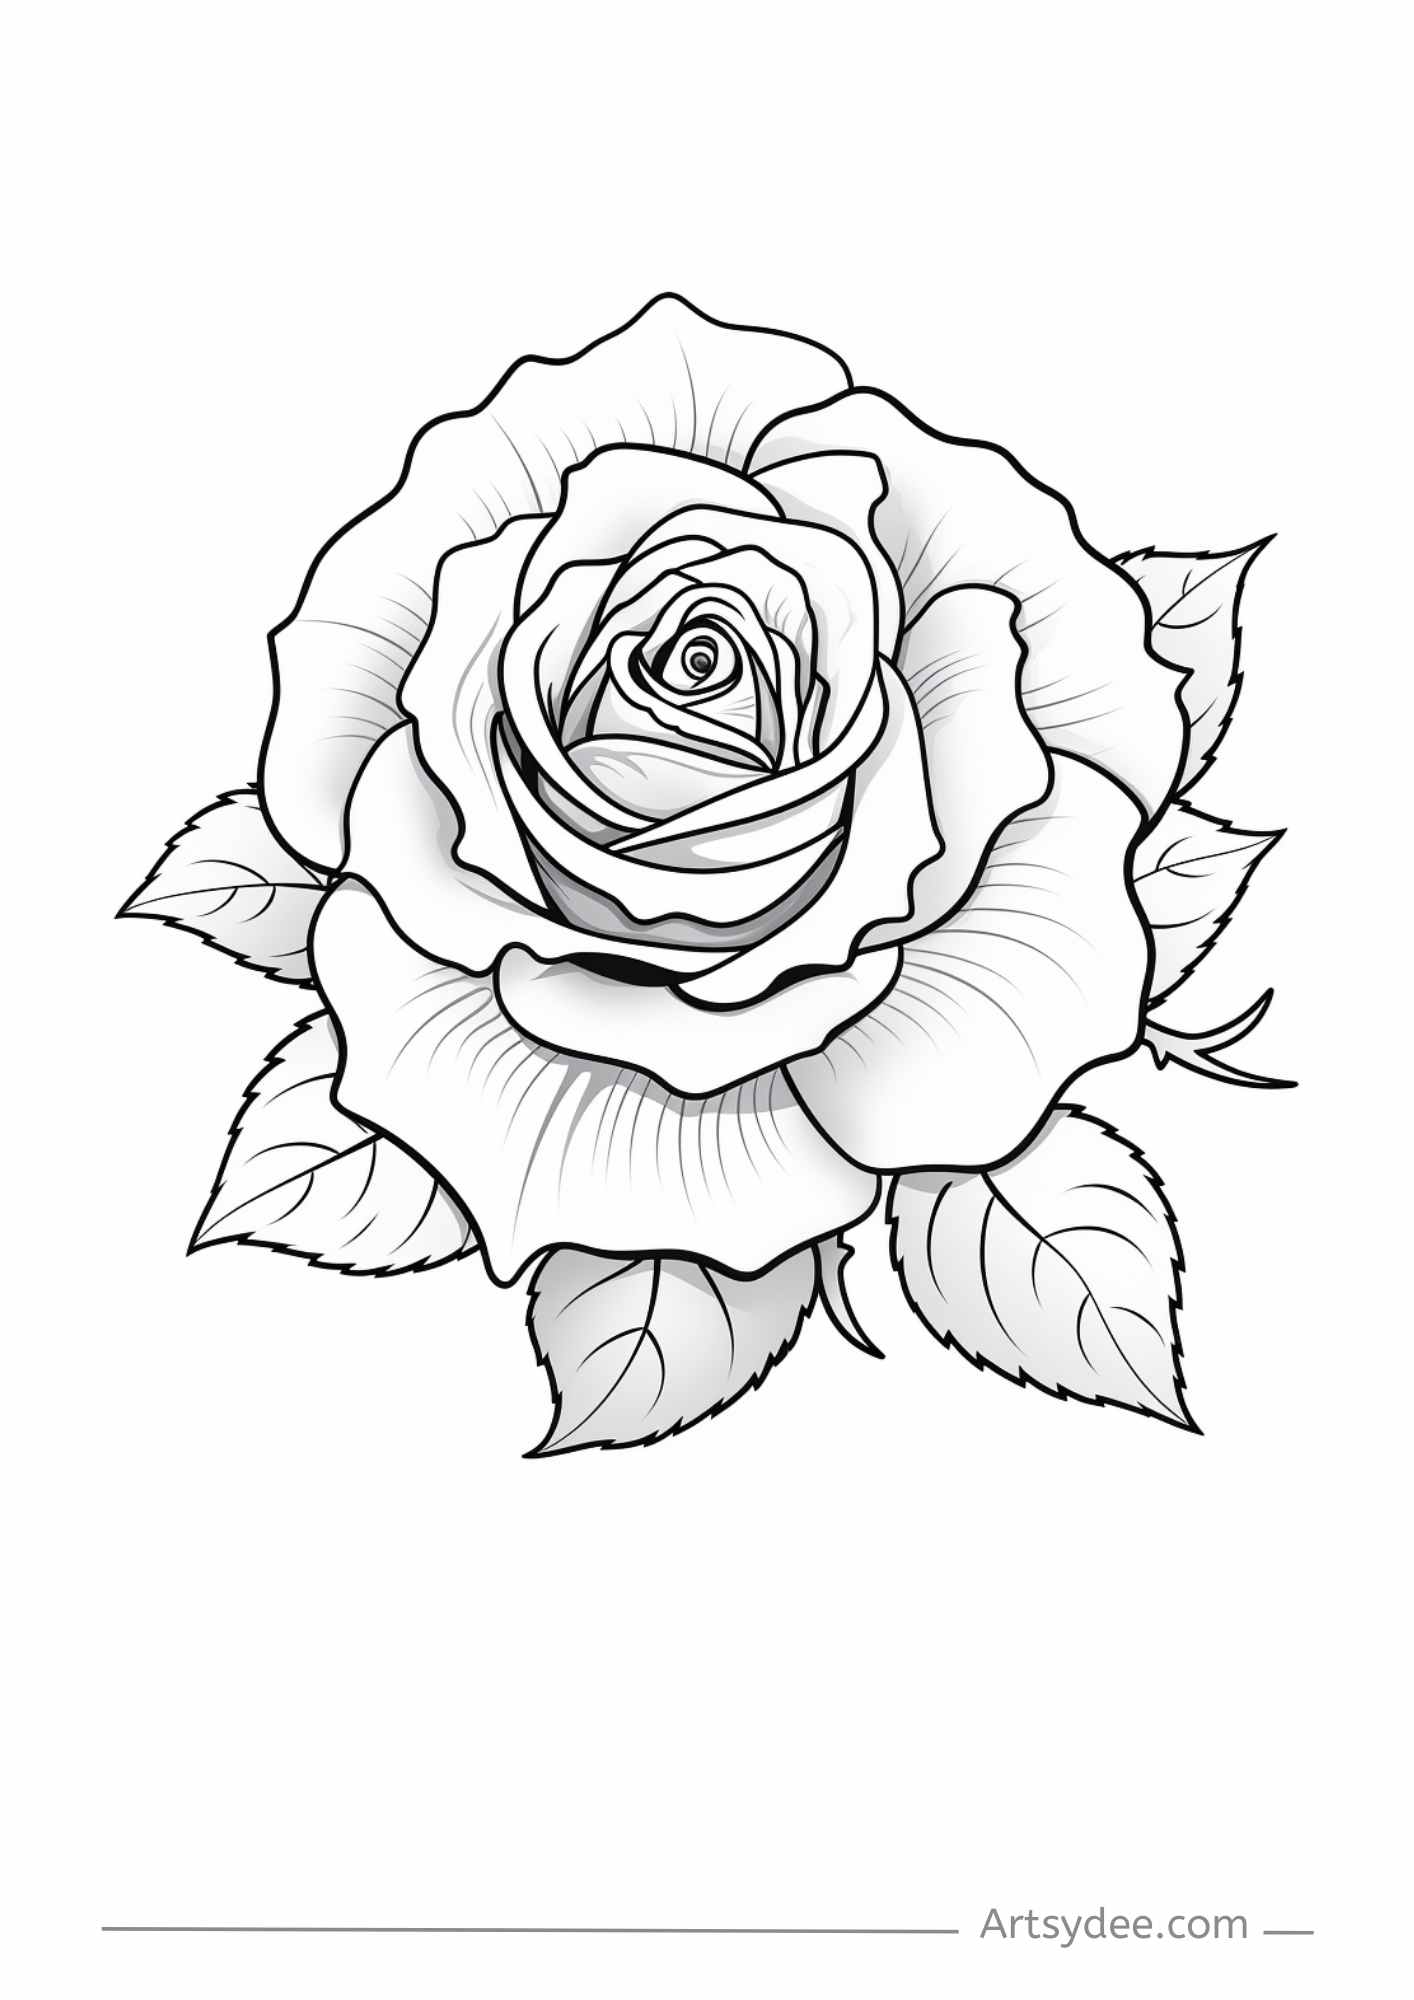 19 Free Rose Printables for Your Creative Arts & Craft Projects ...